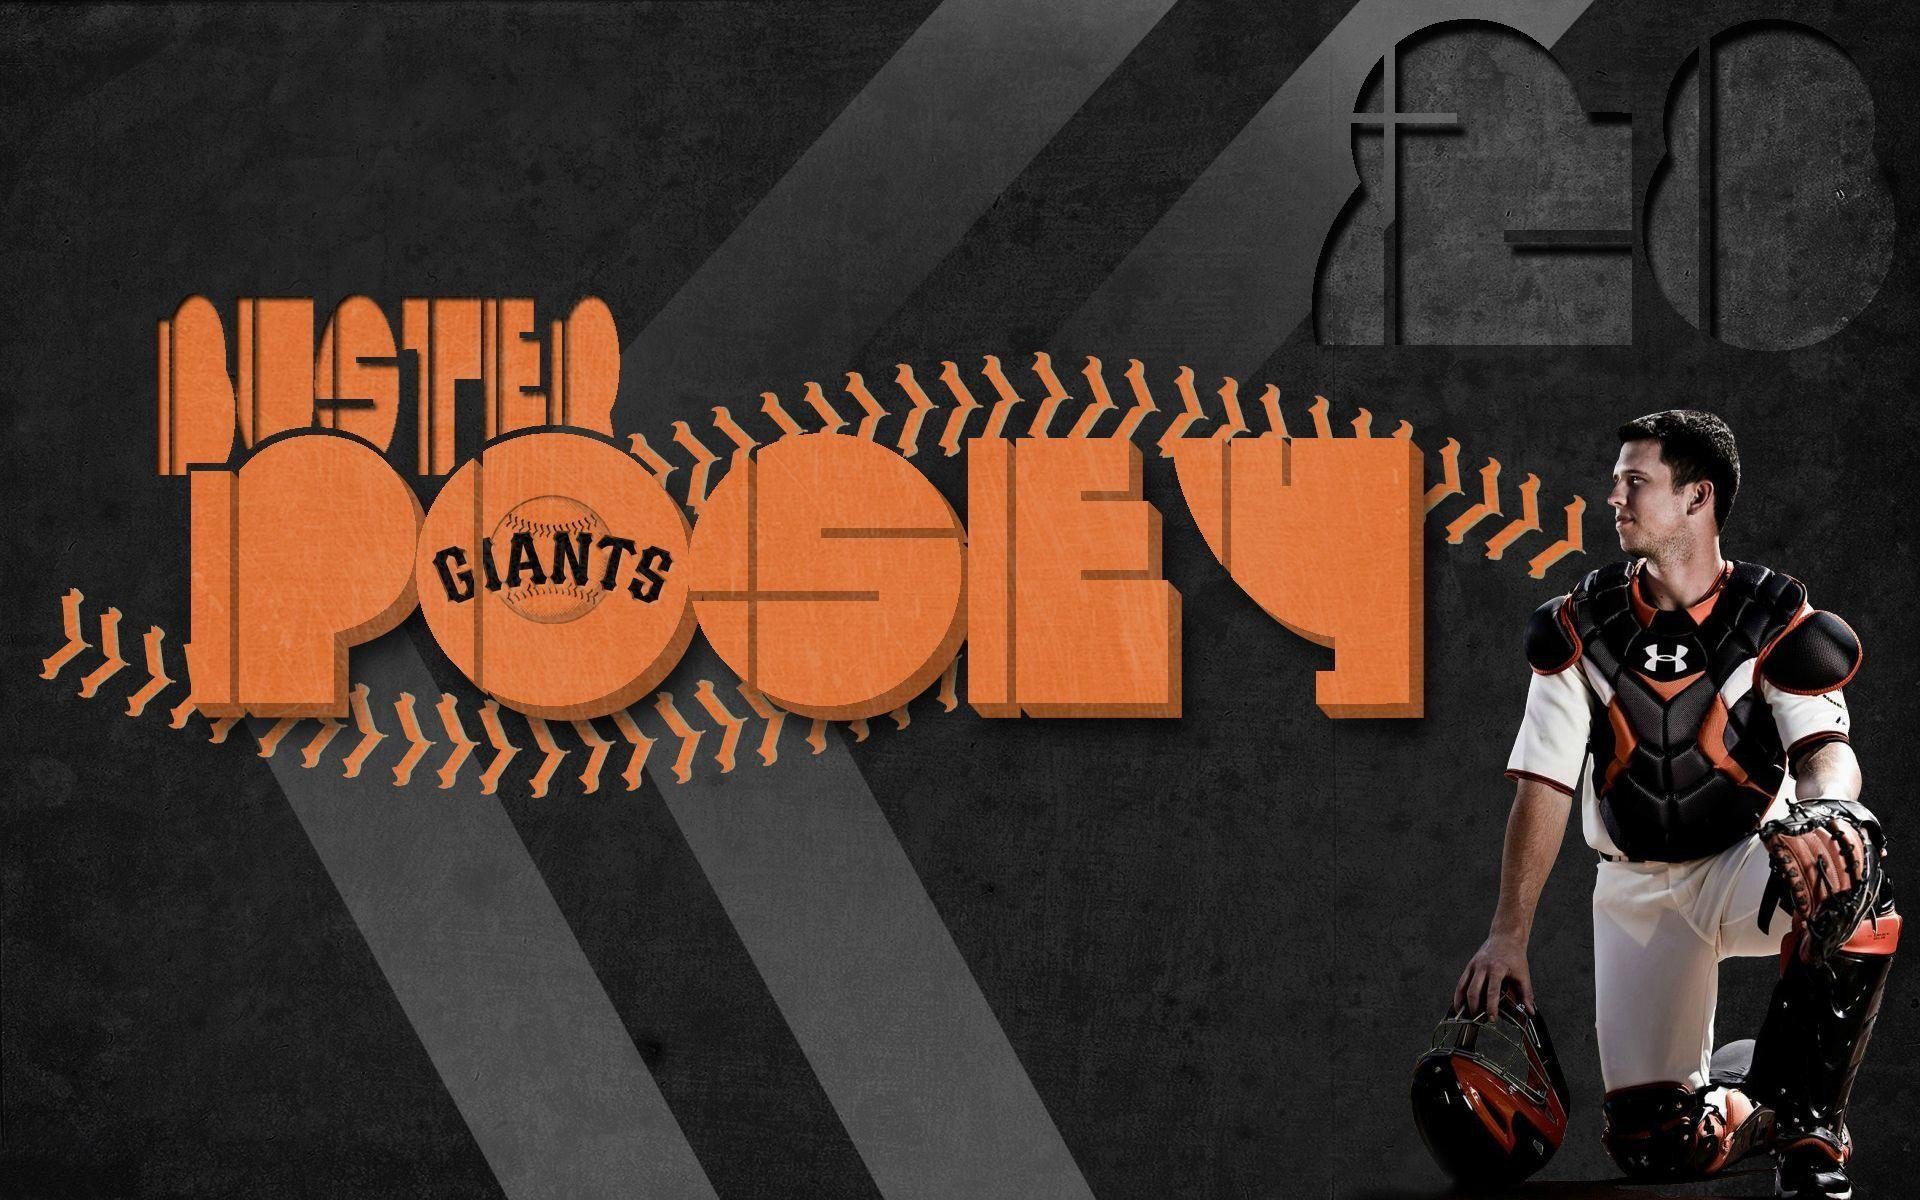 Wallpaper.wiki Buster Posey Widescreen Wallpaper PIC WPB0013249